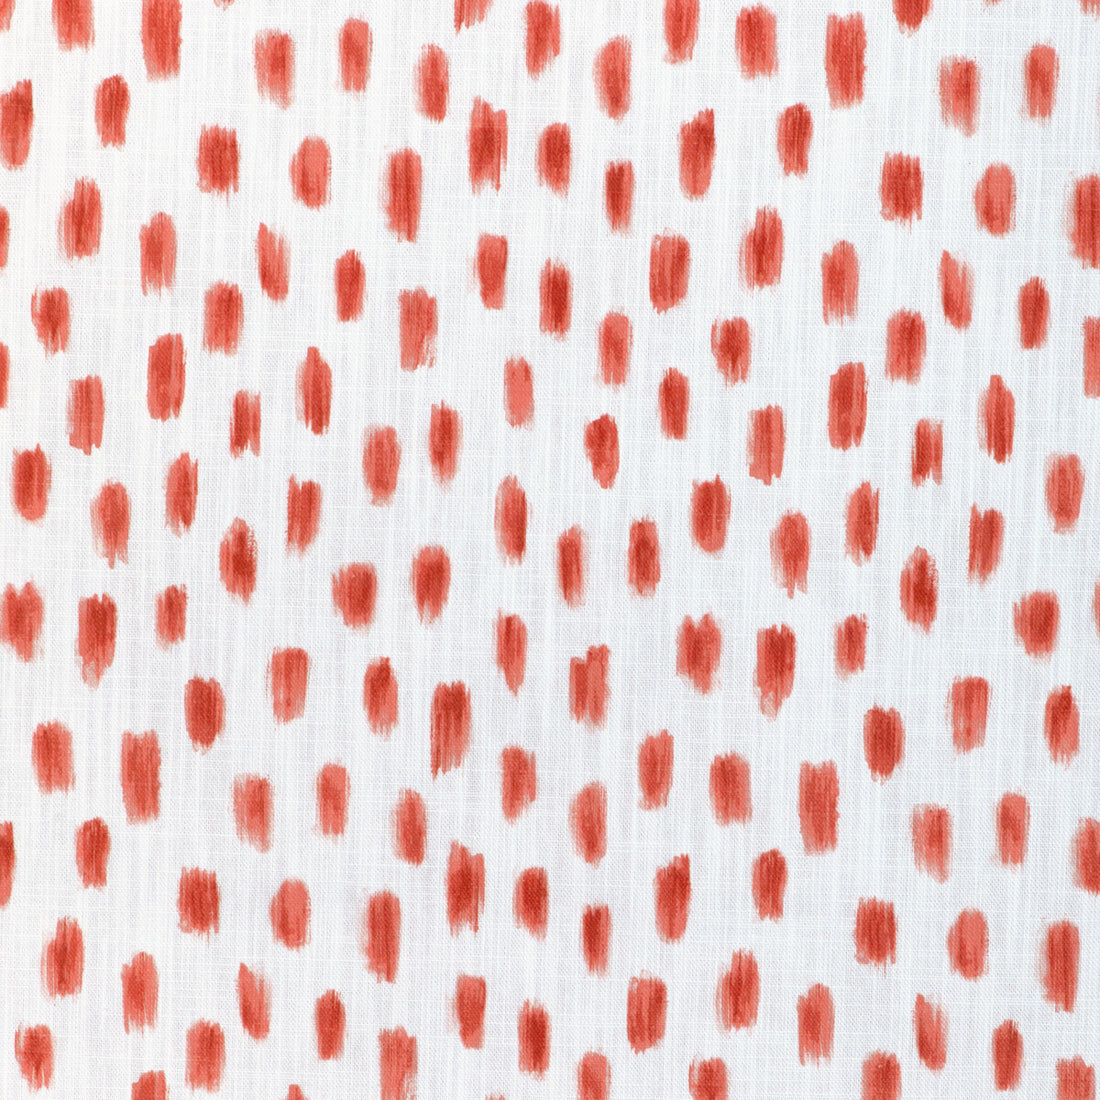 Brush Off fabric in scarlet color - pattern BRUSH OFF.19.0 - by Kravet Basics in the Small Scale Prints collection